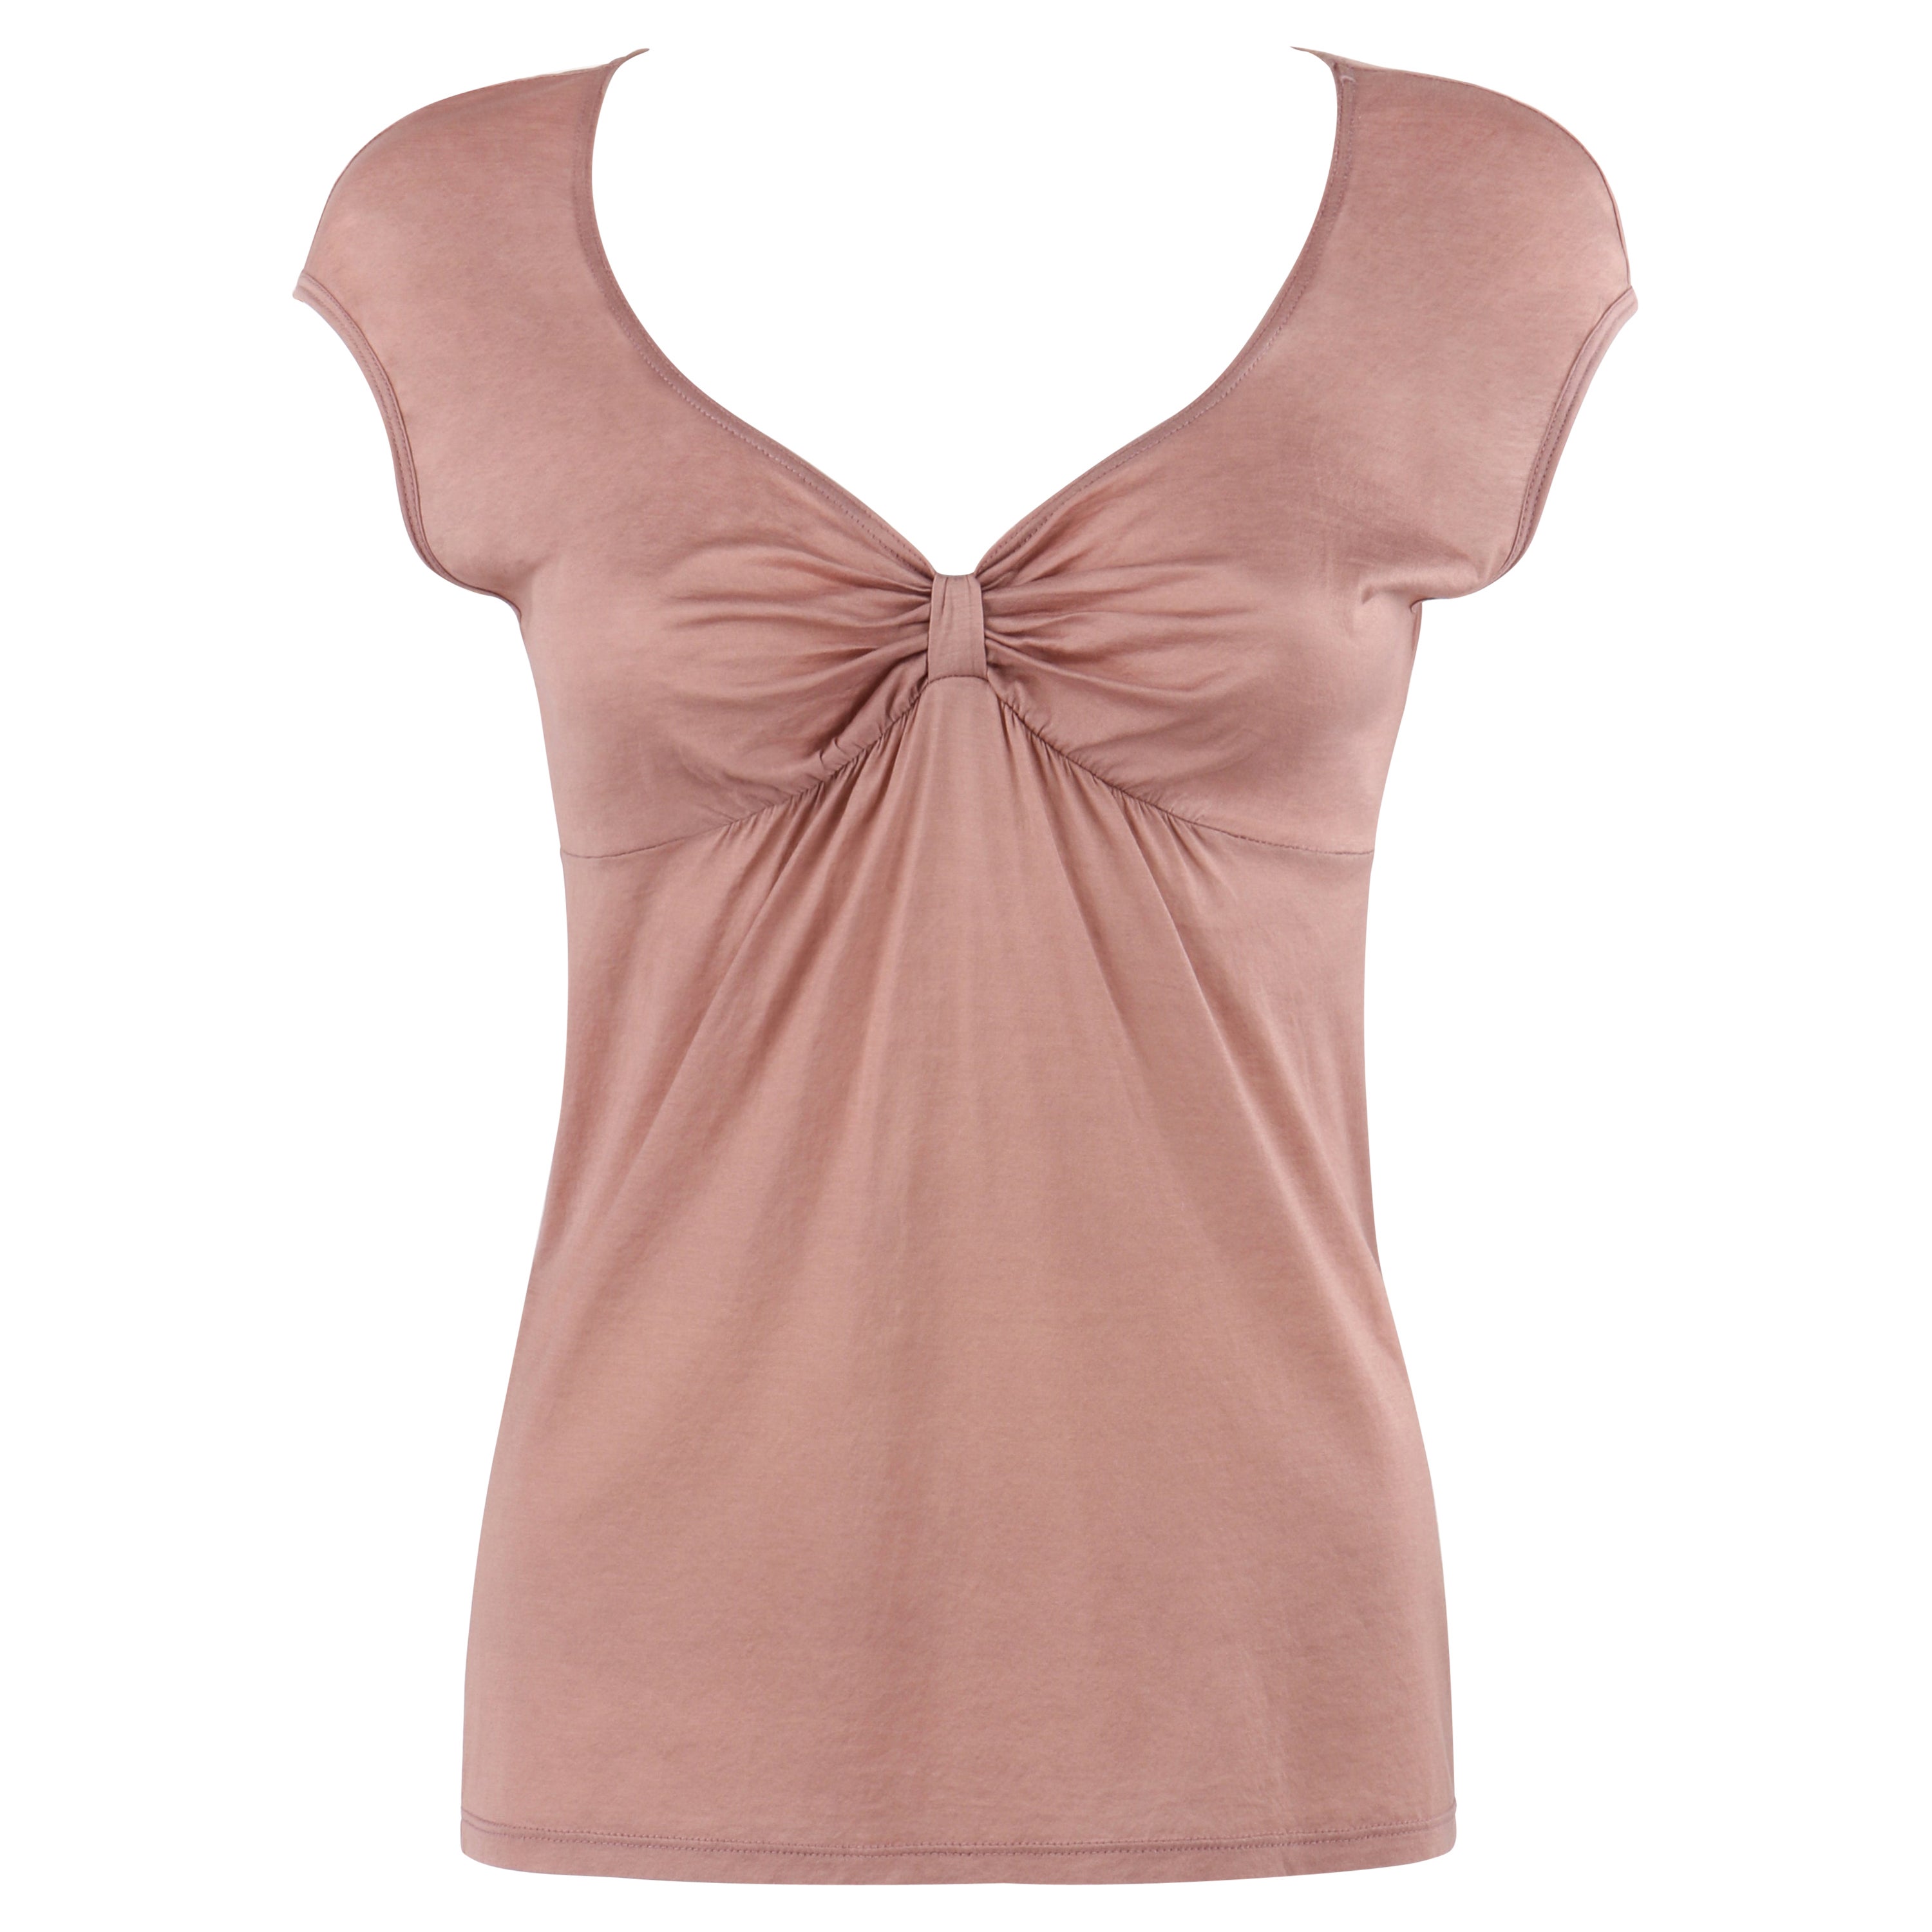 ALEXANDER McQUEEN S/S 2001 "Voss" Pink Mauve Cap Sleeve Gathered Ruched Bow Top For Sale